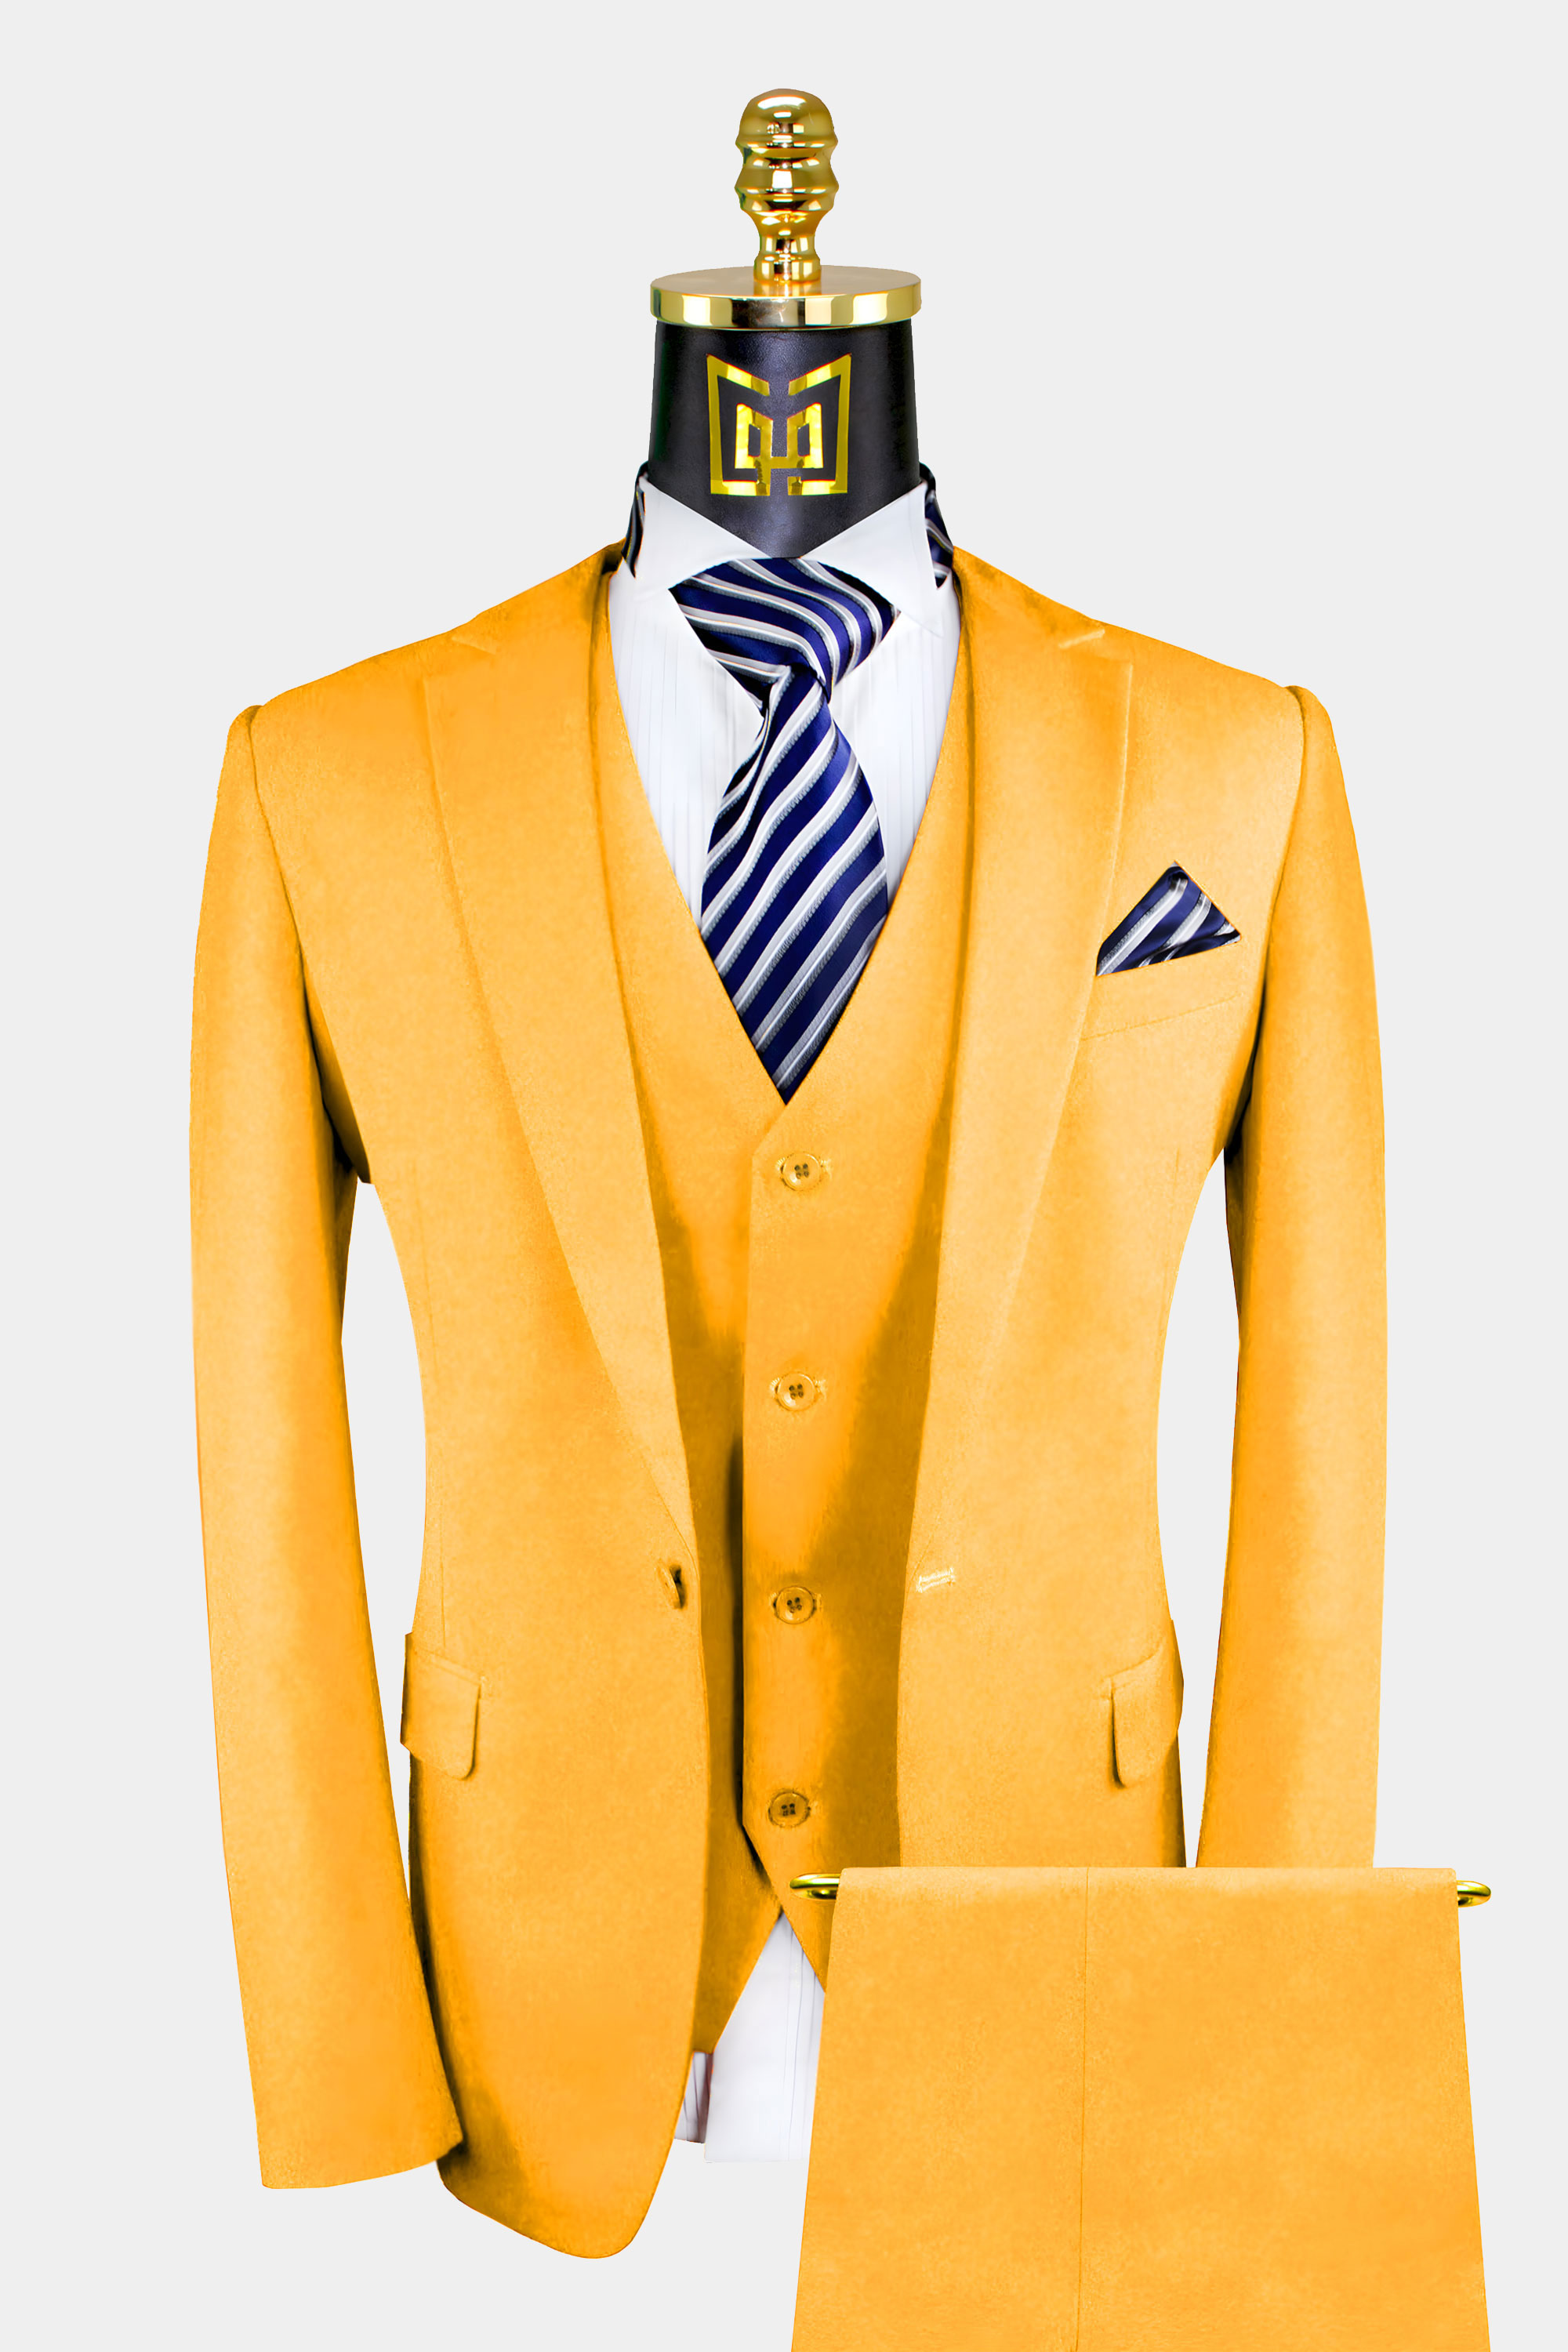 Classic All Gold Suit - 3 Piece